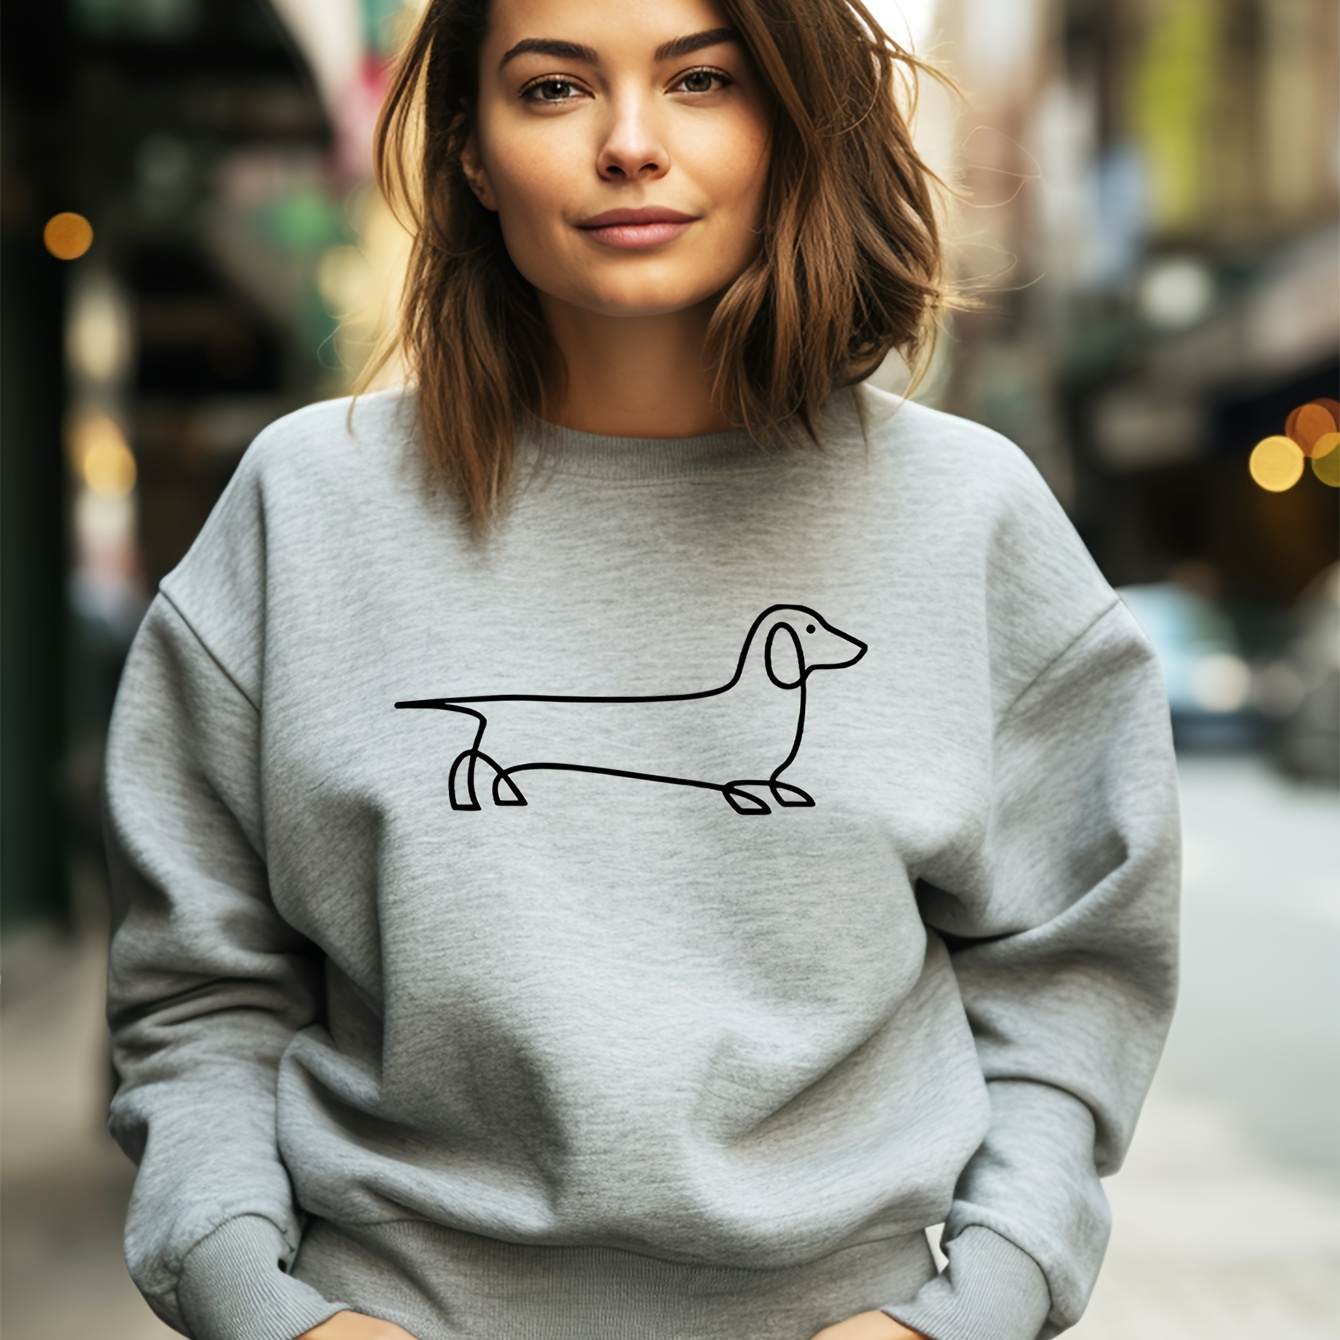 

Women's Casual Crew Neck Sweatshirt With Dachshund Print, Loose Fit Sport Pullover Top, Cozy Comfort Fashion For Fall